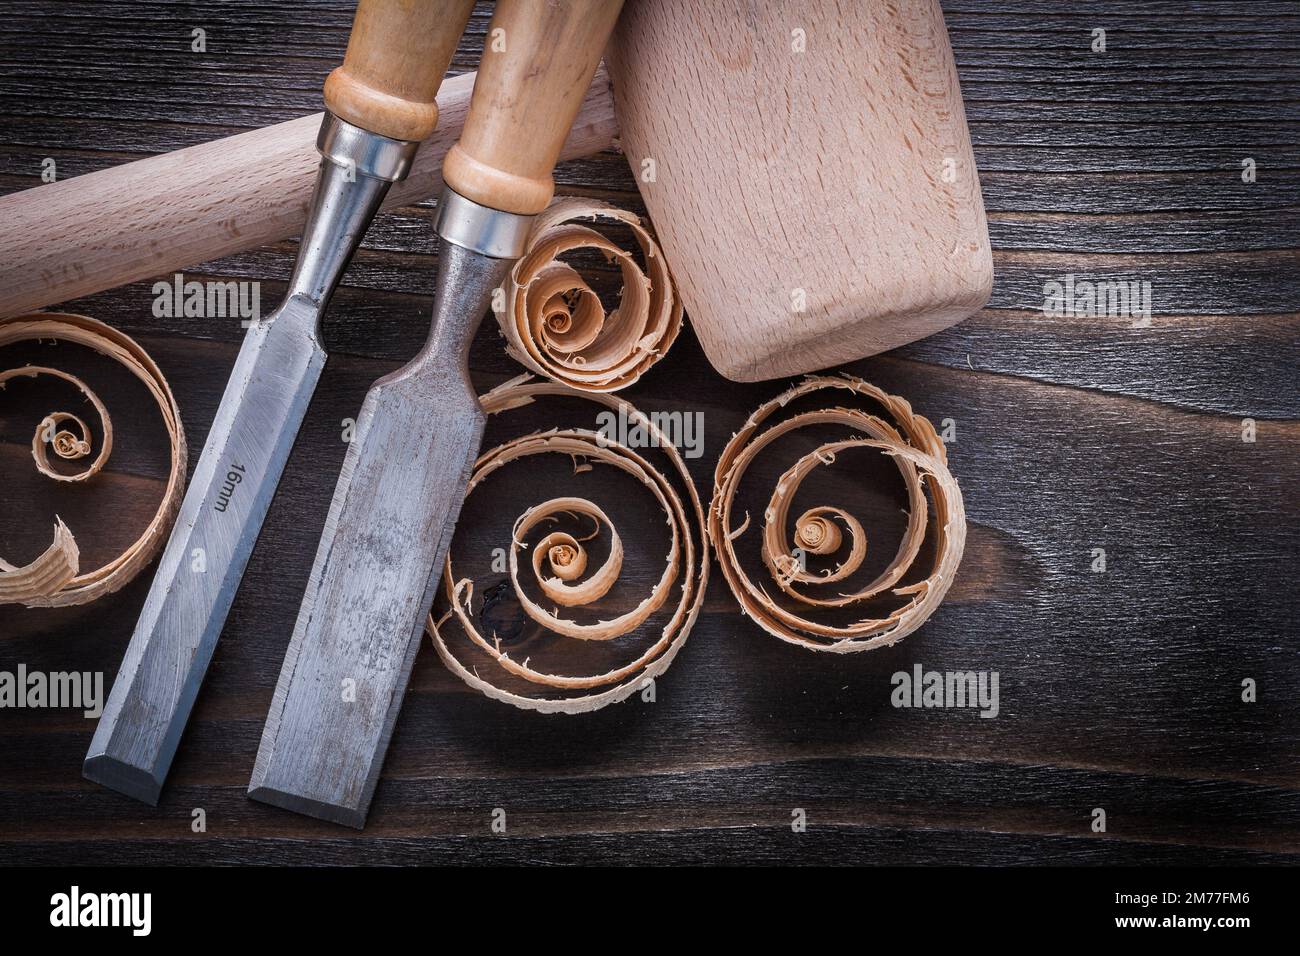 Set of wooden hammer firmer chisels and curled up shavings on vintage wood board construction concept. Stock Photo